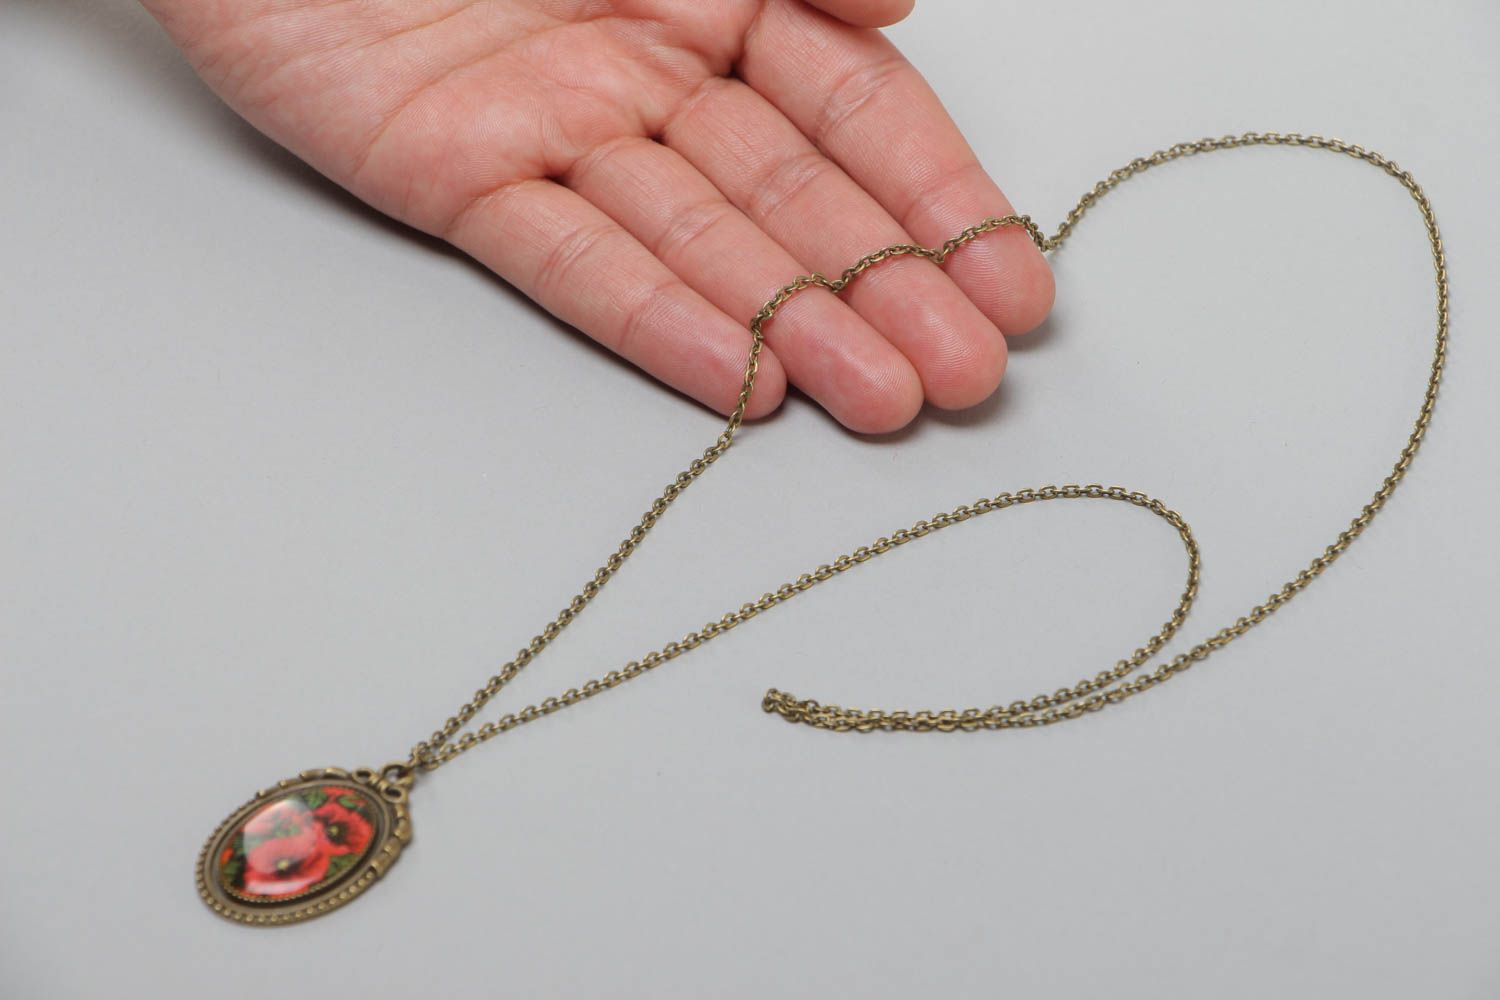 Handmade metal vintage neck pendant with glass glaze and metal chain Red Poppies photo 5